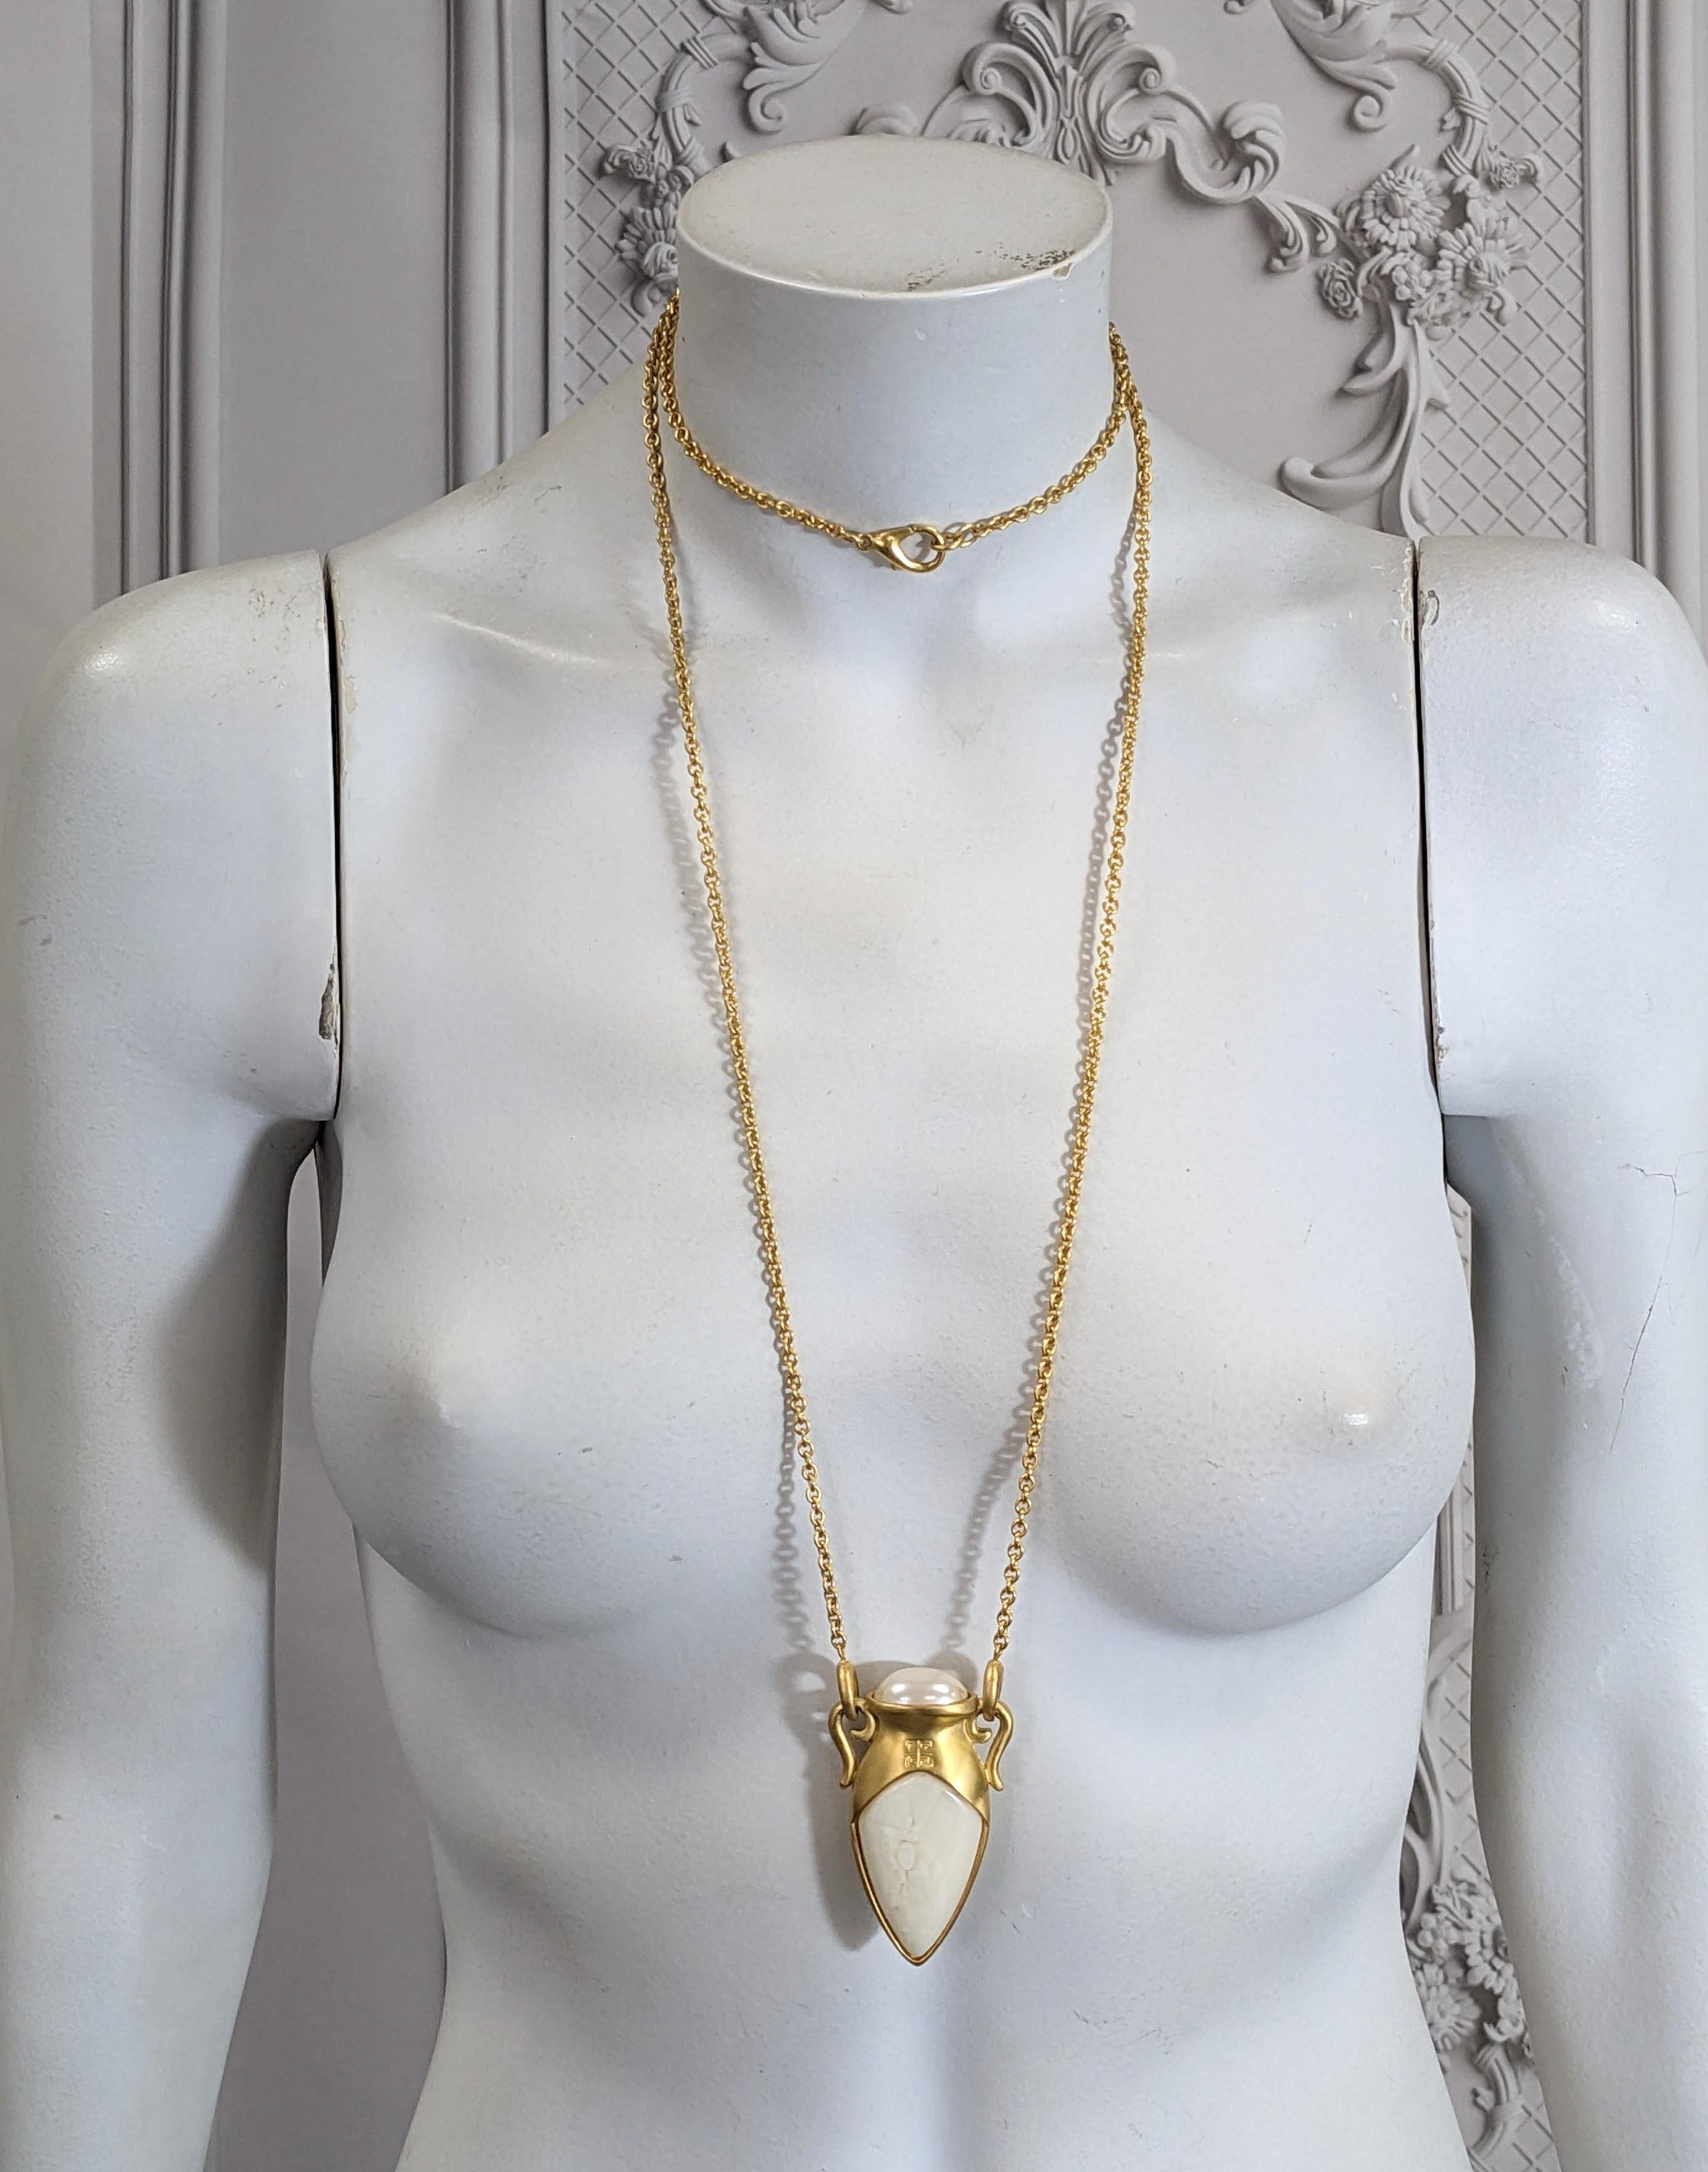 Givenchy Matte Gold Amphora Pendant In Excellent Condition For Sale In New York, NY